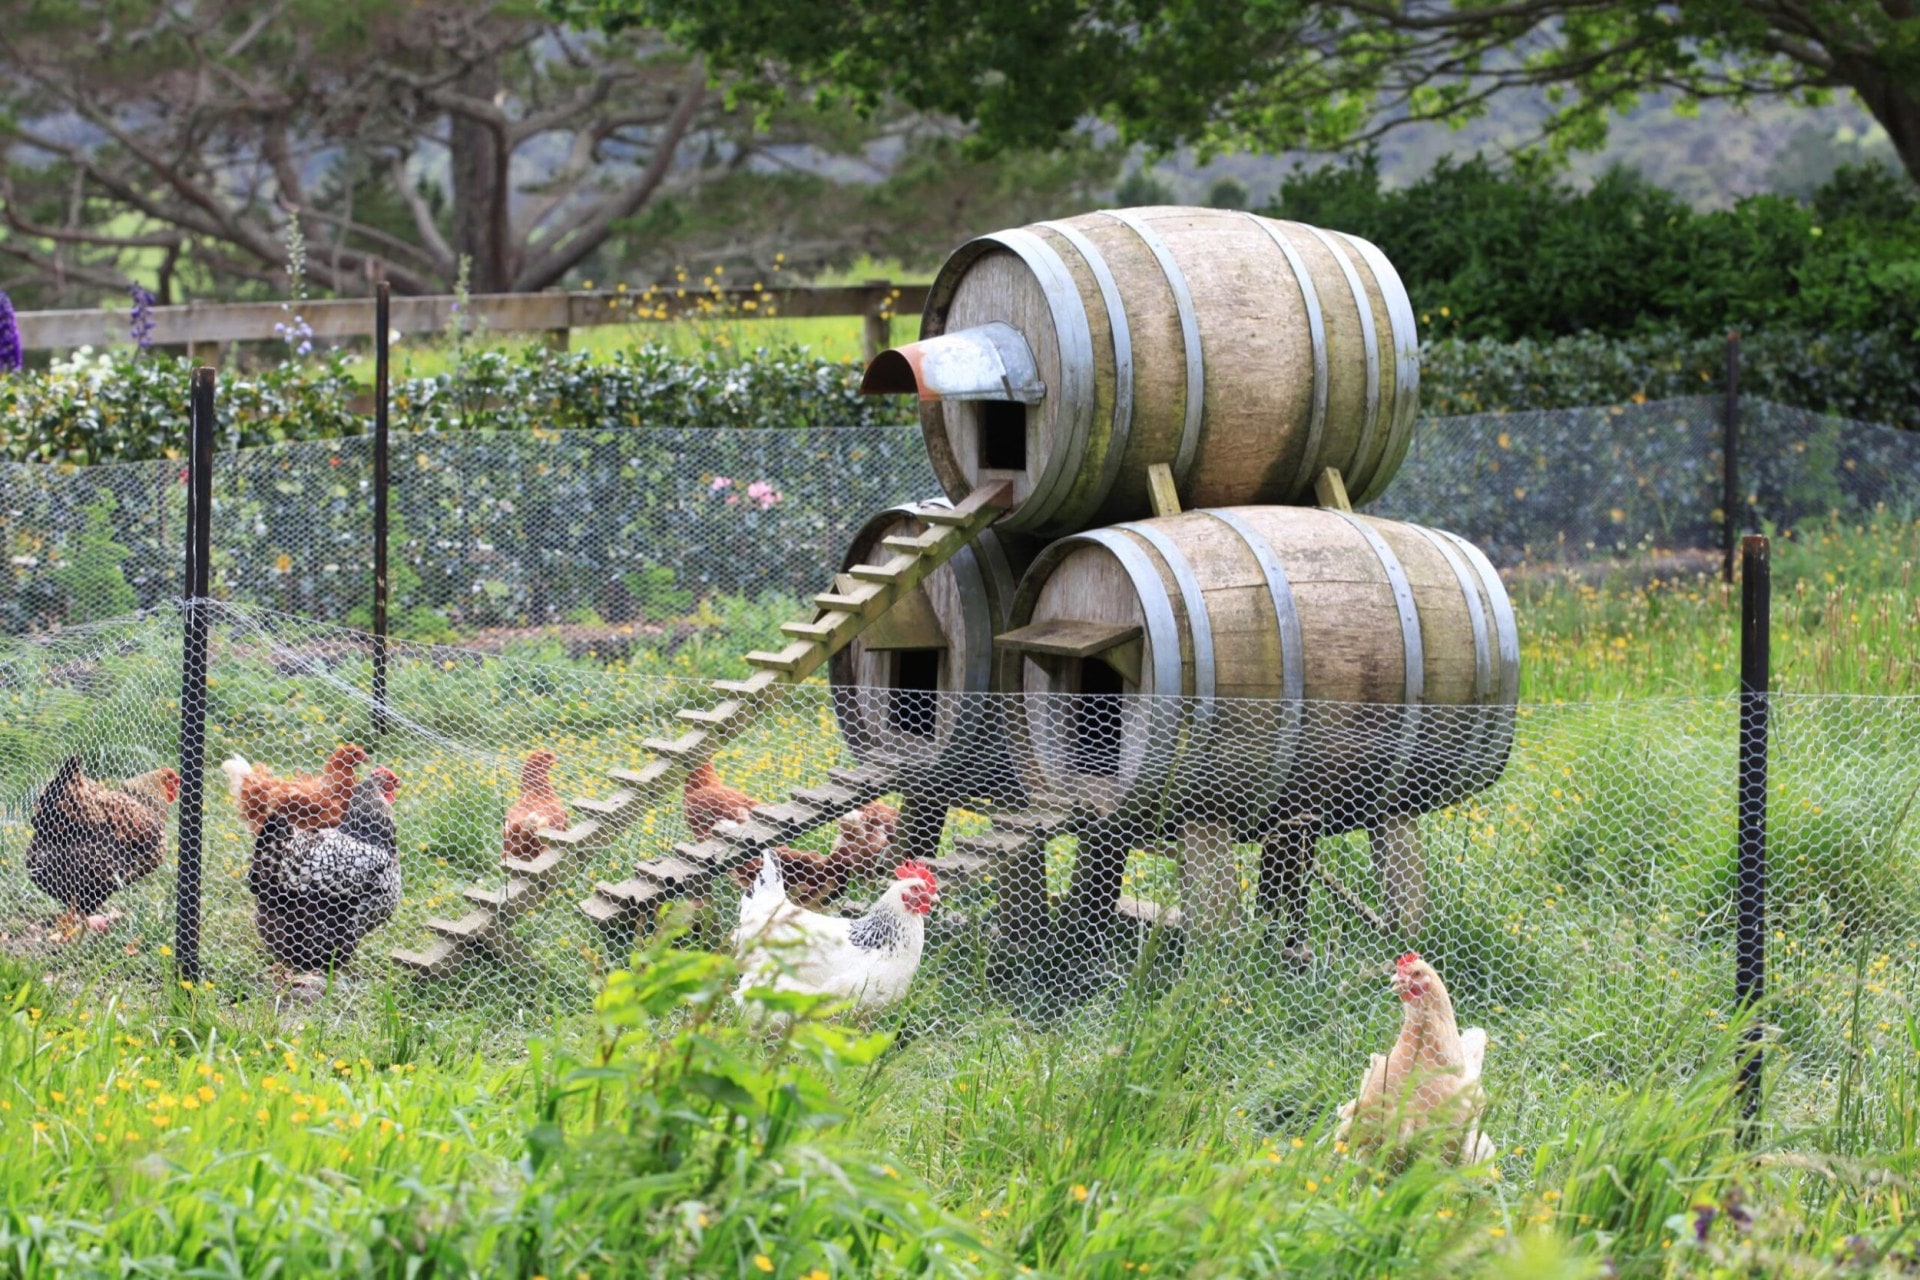 chickens in a coop made from barrels 